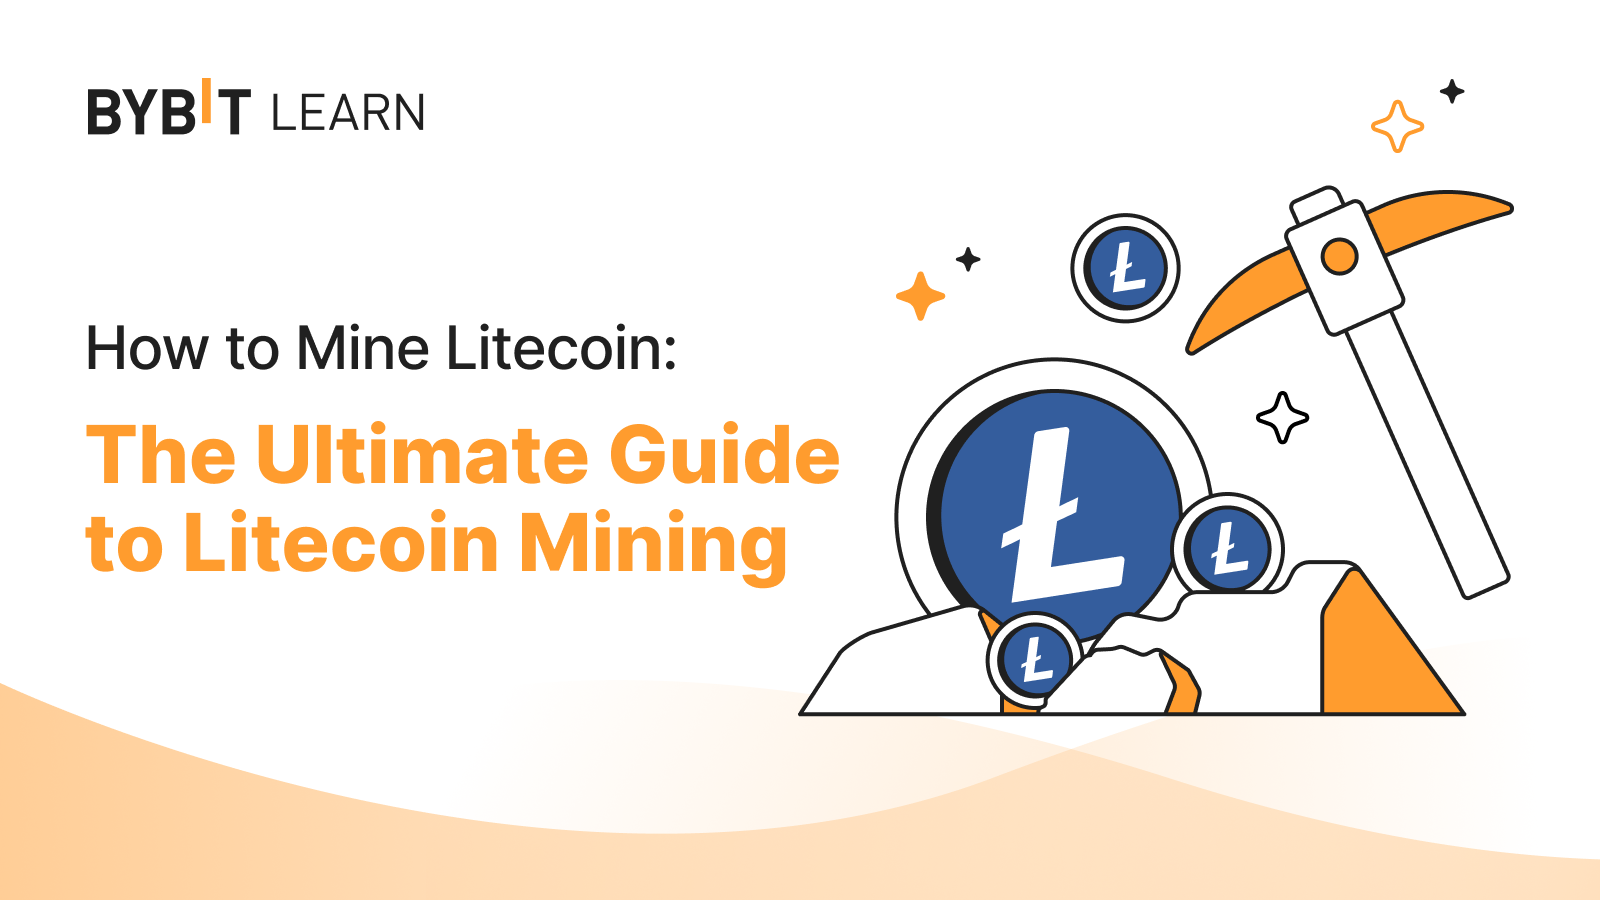 Ved daggry voldtage smykker How to Mine Litecoin: The Ultimate Guide to Litecoin Mining | Bybit Learn